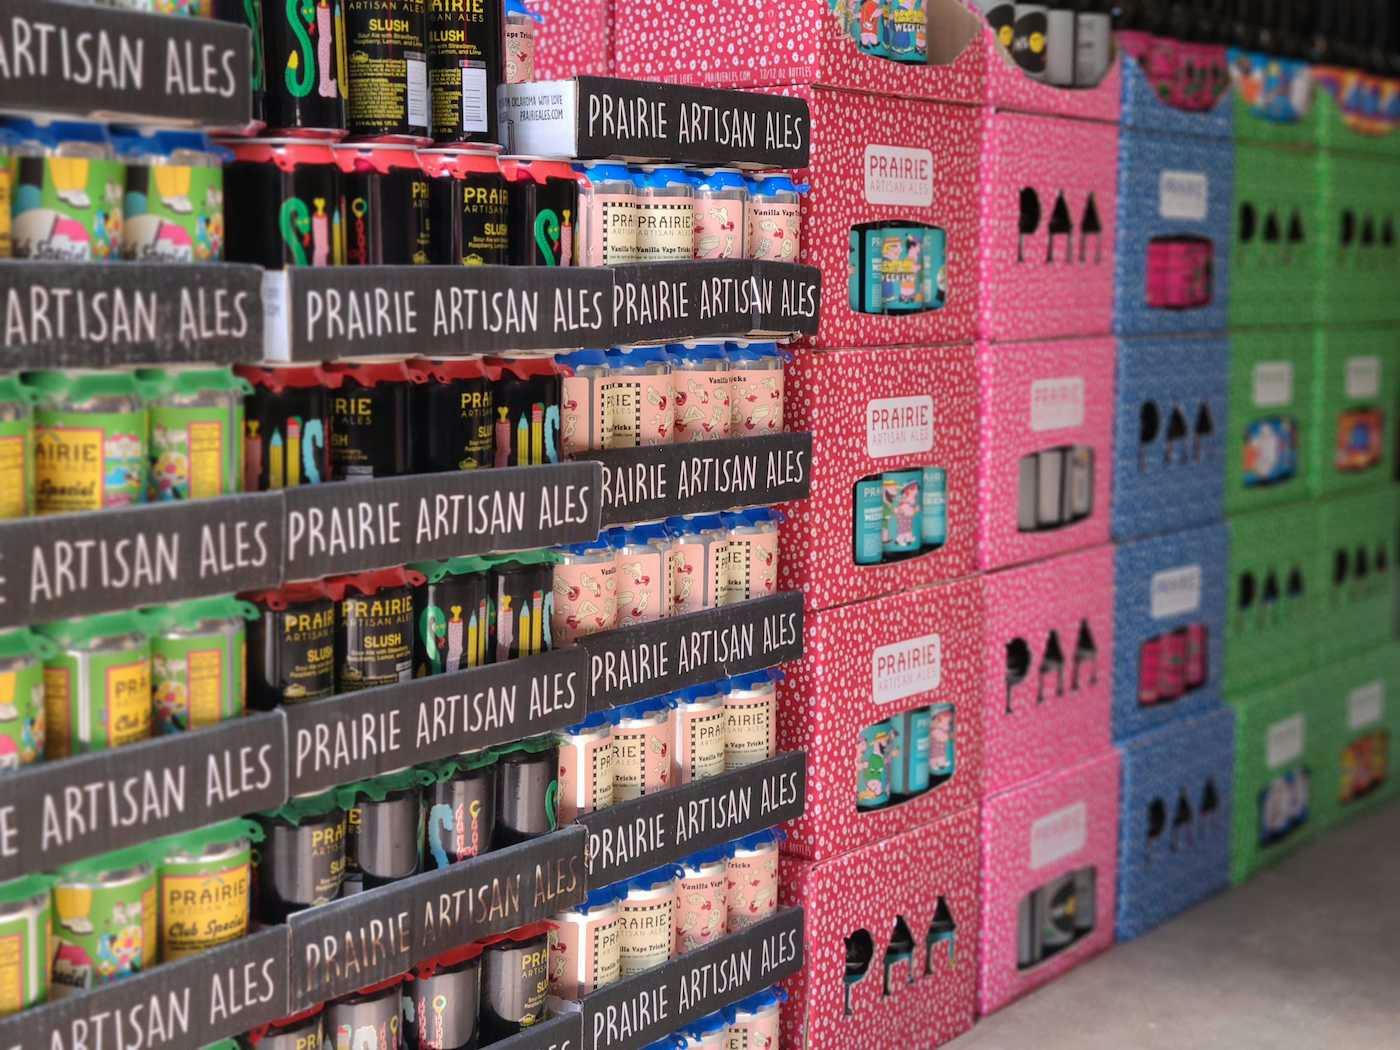 Stacks of colorful Prairie Artisan Ales beer cans in cases and boxes